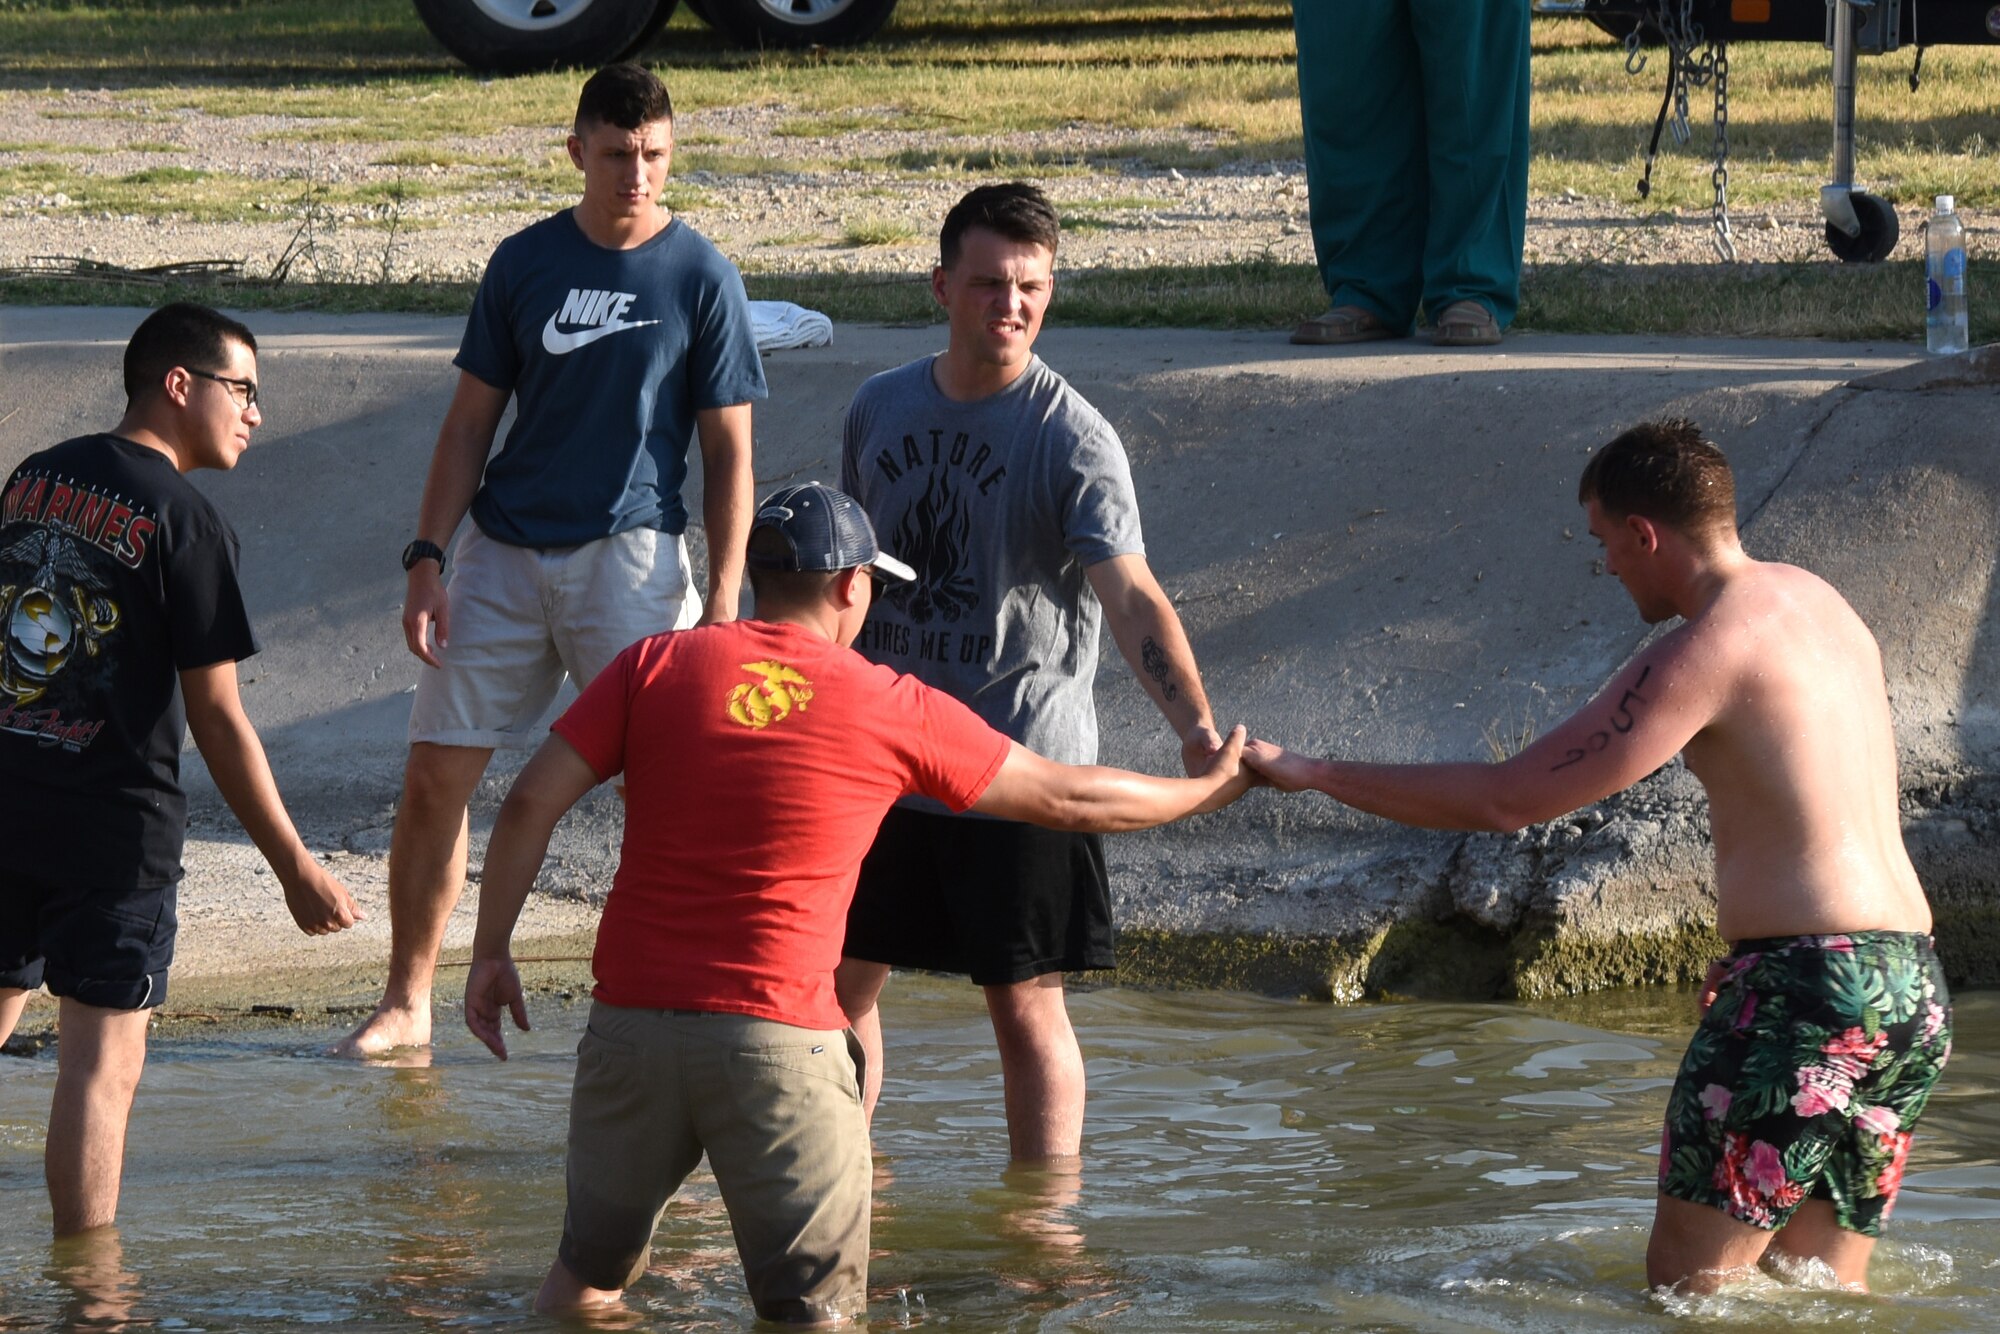 Volunteers help a triathlon participant out of Lake Nasworthy during the Goodfellow Annual Triathlon at the Goodfellow Air Force Base Recreation Camp San Angelo, Texas, July 28, 2018. A 400 meter swim was the first section of the triathlon followed by a 20K bike ride and a 5K run. (U.S. Air Force photo by Airman 1st Class Zachary Chapman/Released)